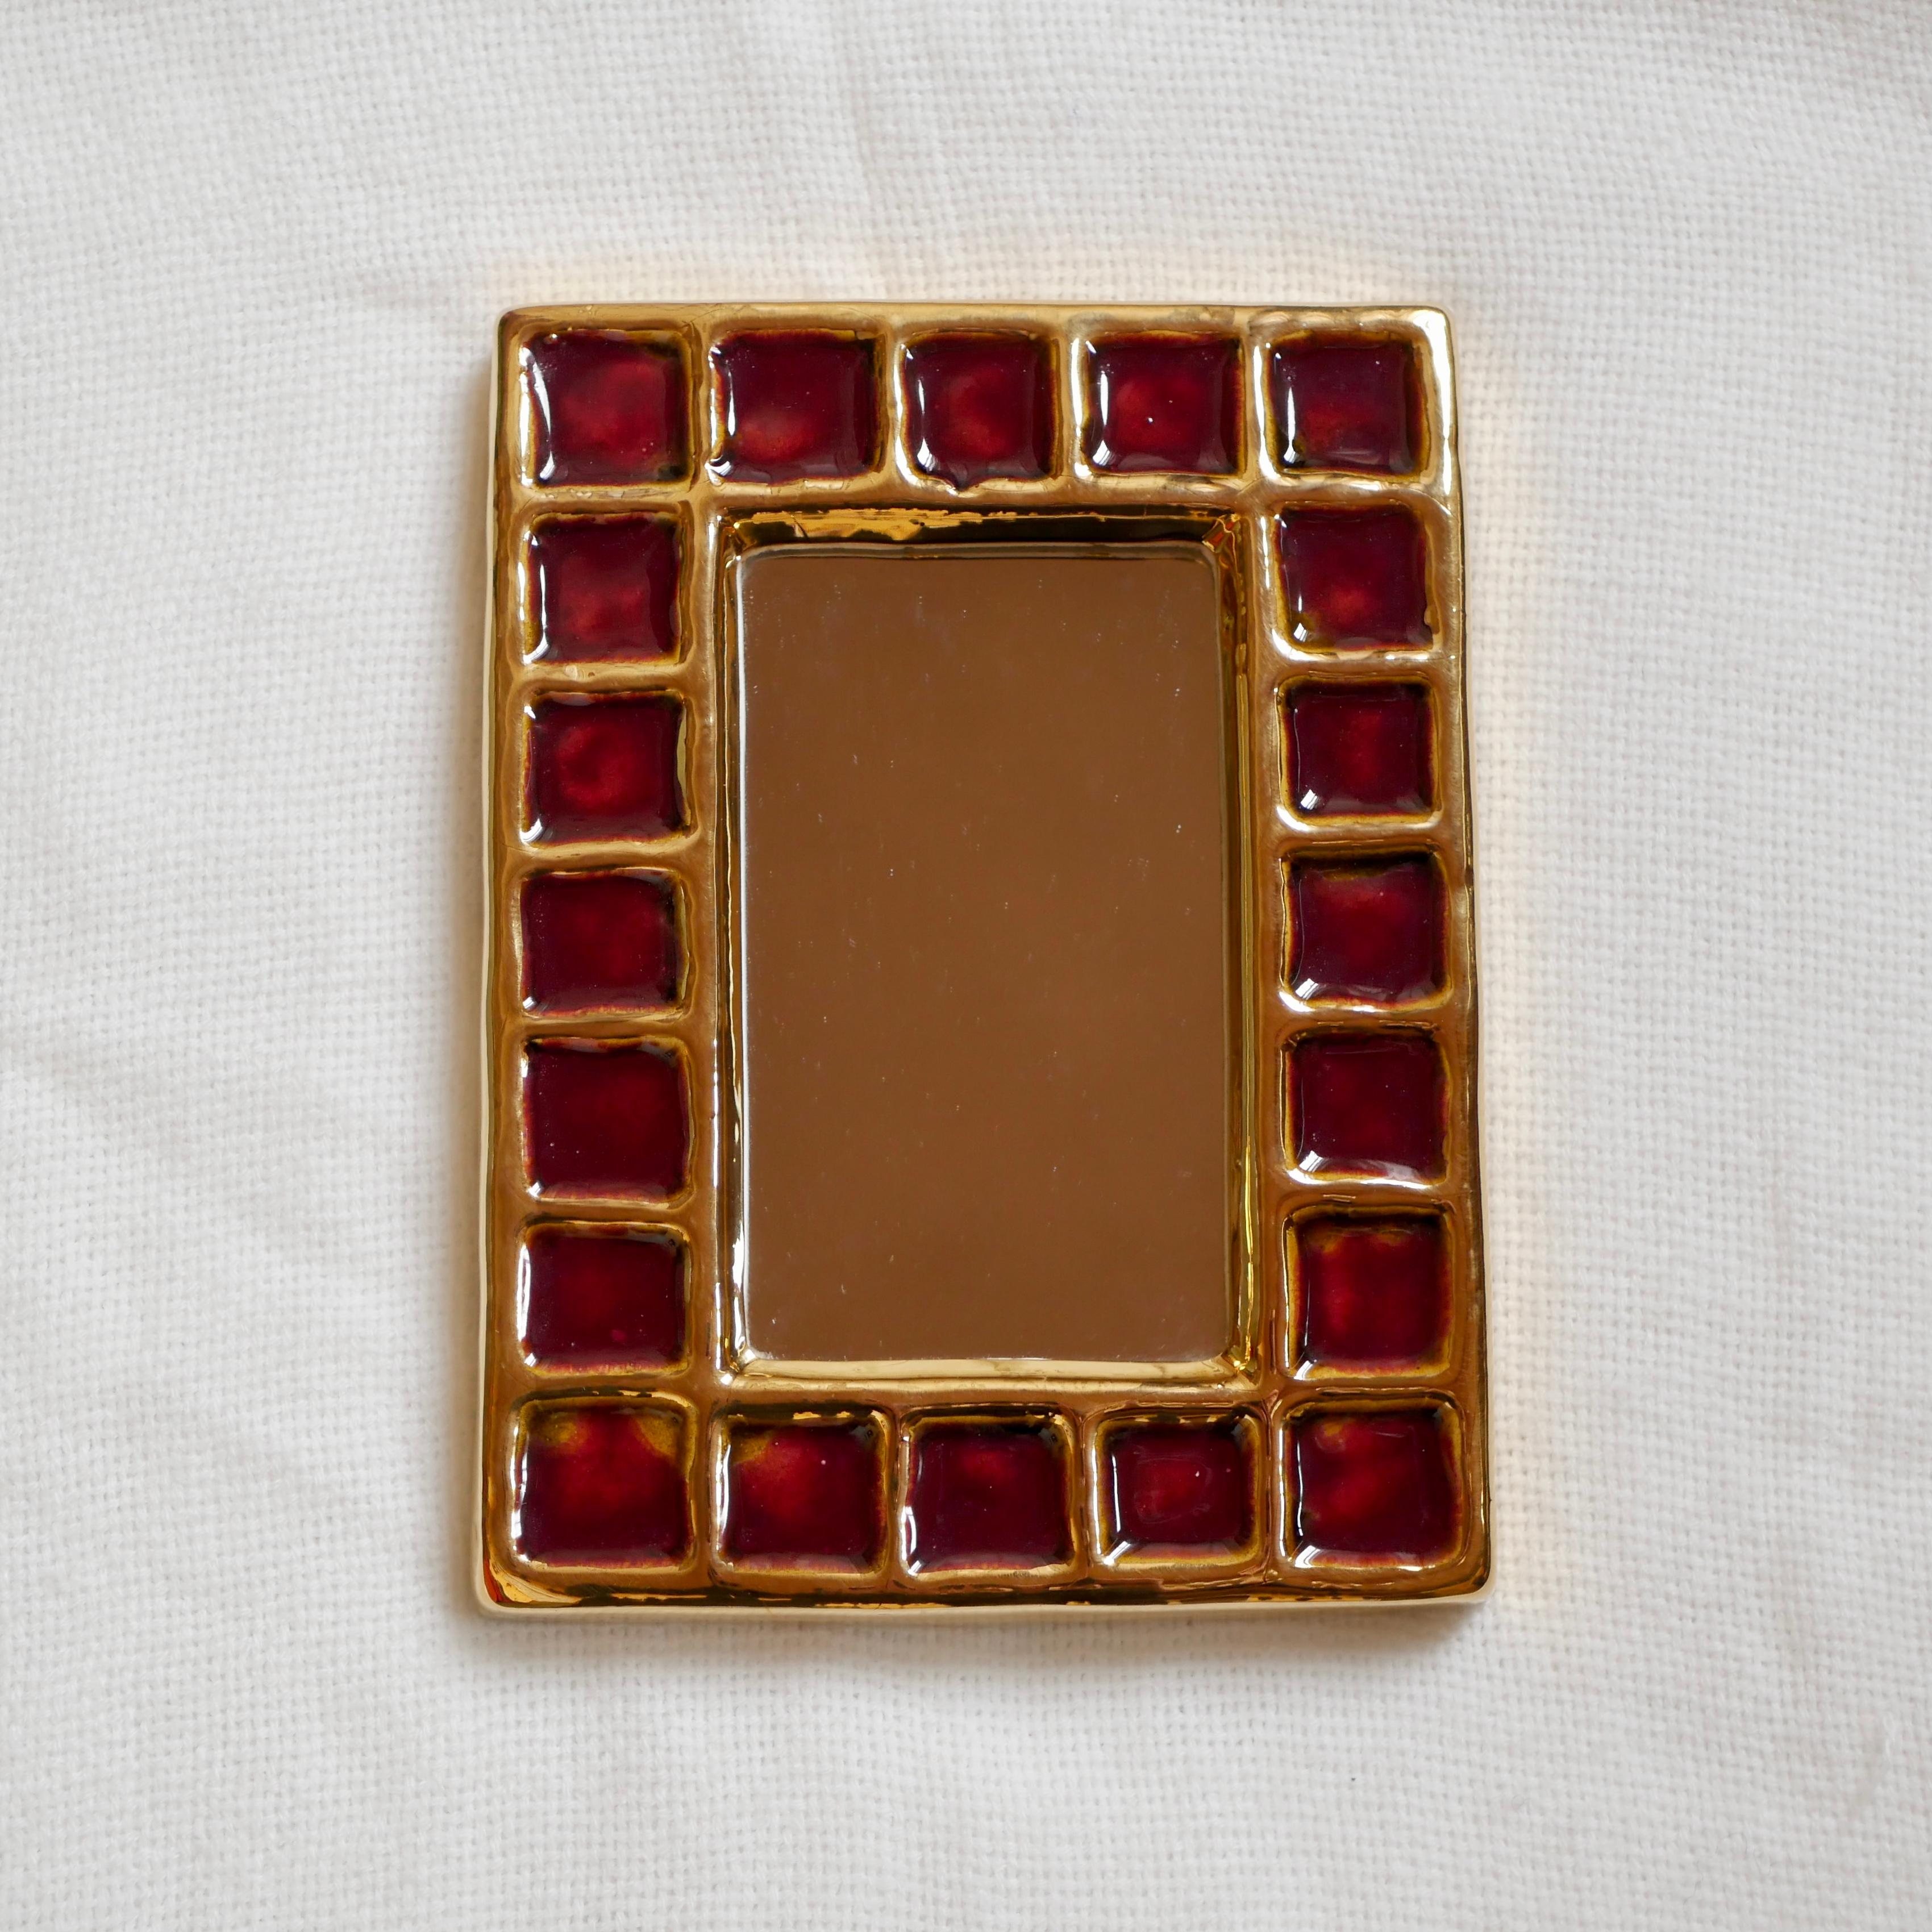 Beautiful jewel-like mirror by François Lembo, made in the 1960s in his Vallauris workshop.
Red and gold squares, excellent condition.
With the iconic signature on the back.

François Lembo was born in Vallauris and started his career in 1951 in